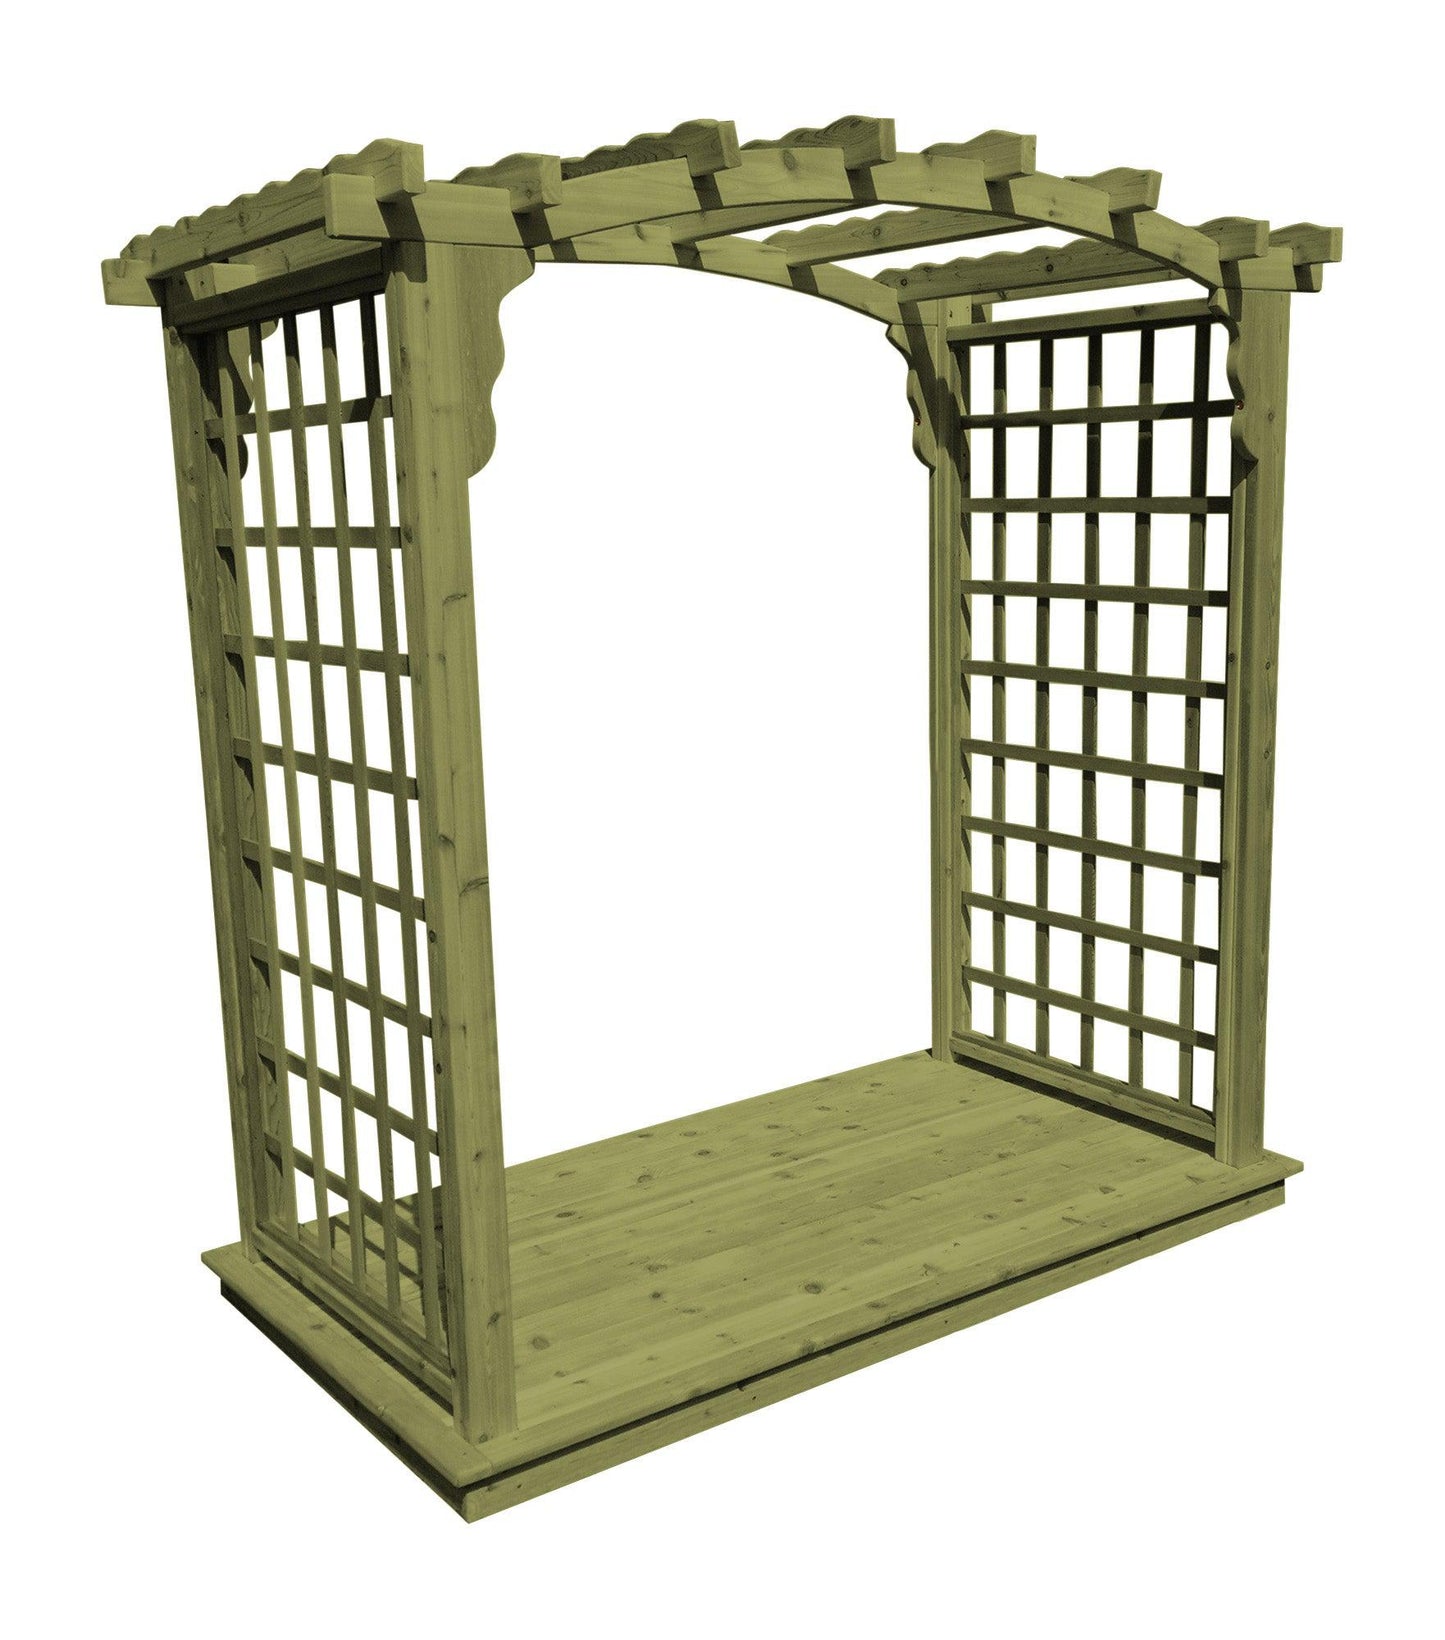 A&L Furniture Co. Western Red Cedar 4' Cambridge Arbor & Deck - LEAD TIME TO SHIP 2 WEEKS